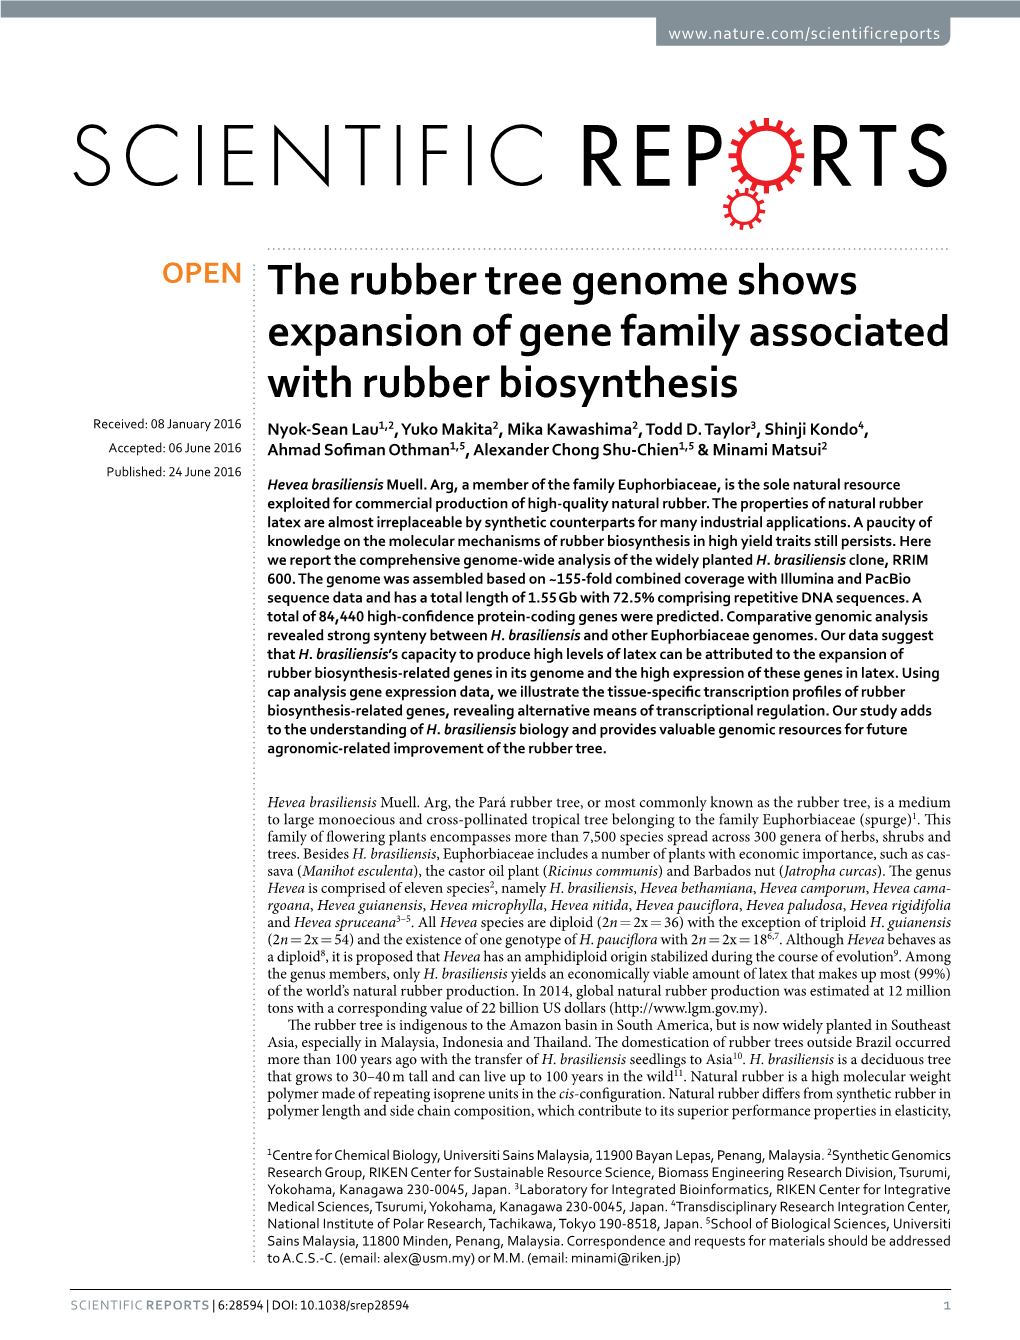 The Rubber Tree Genome Shows Expansion of Gene Family